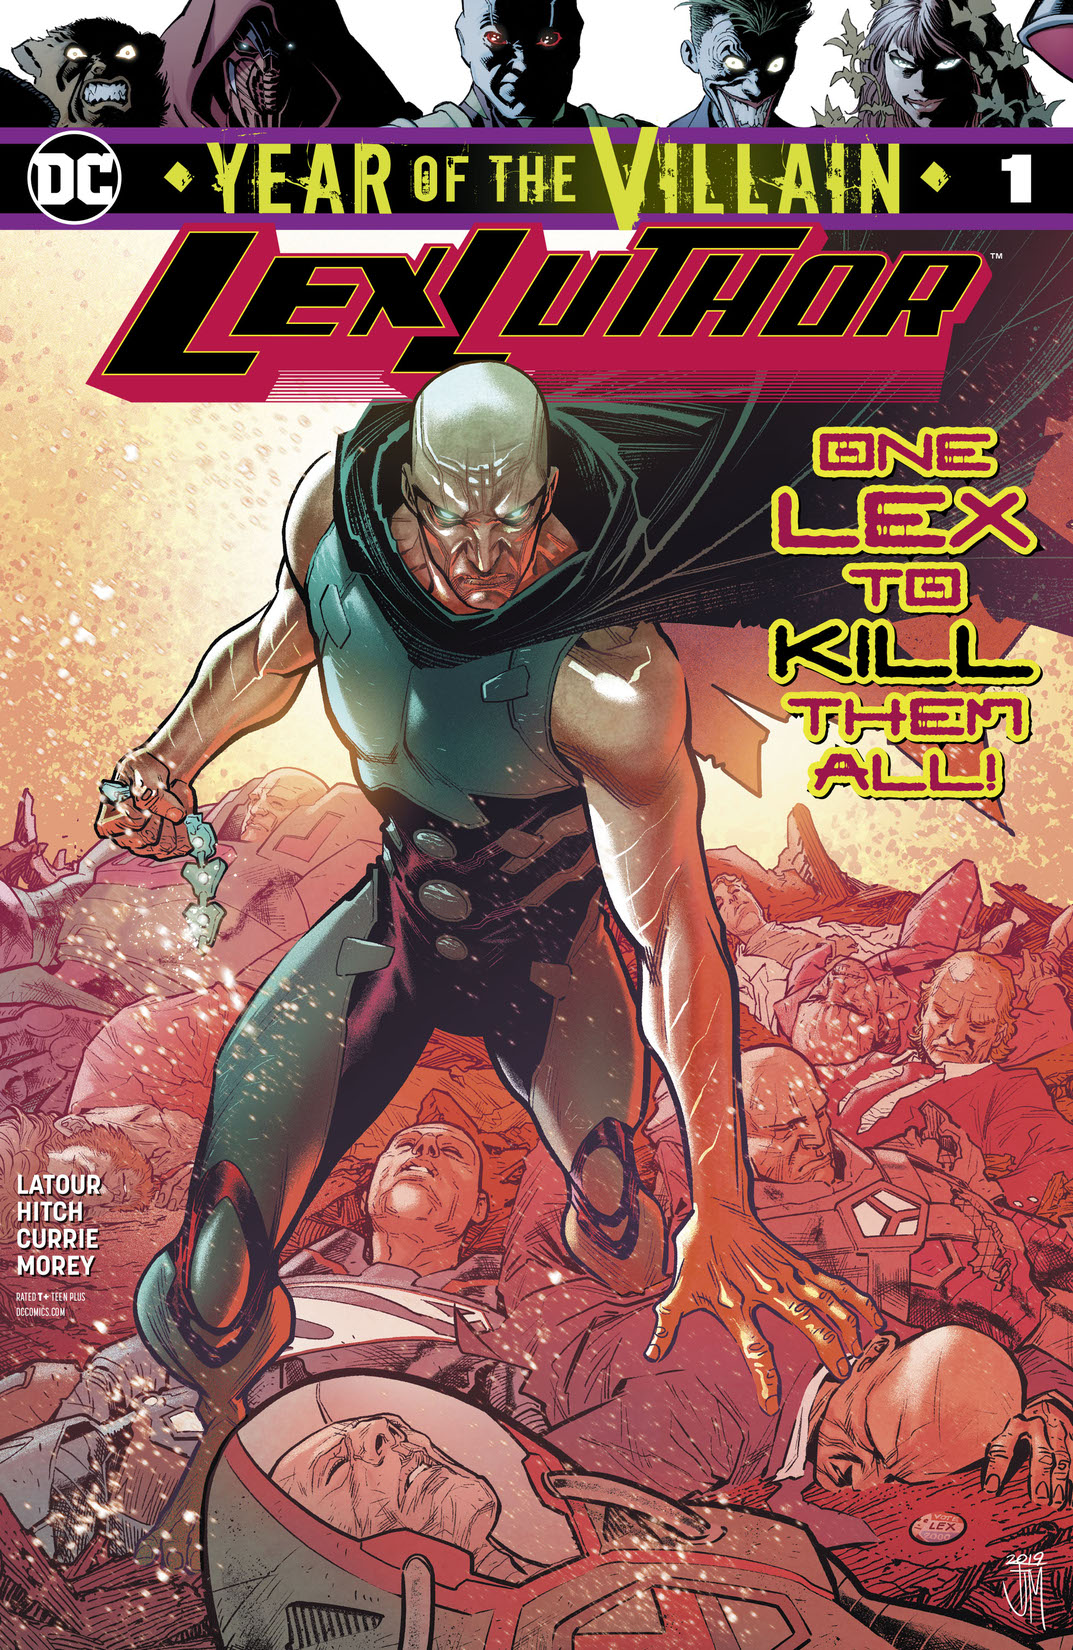 Lex Luthor: Year of the Villain #1 preview images